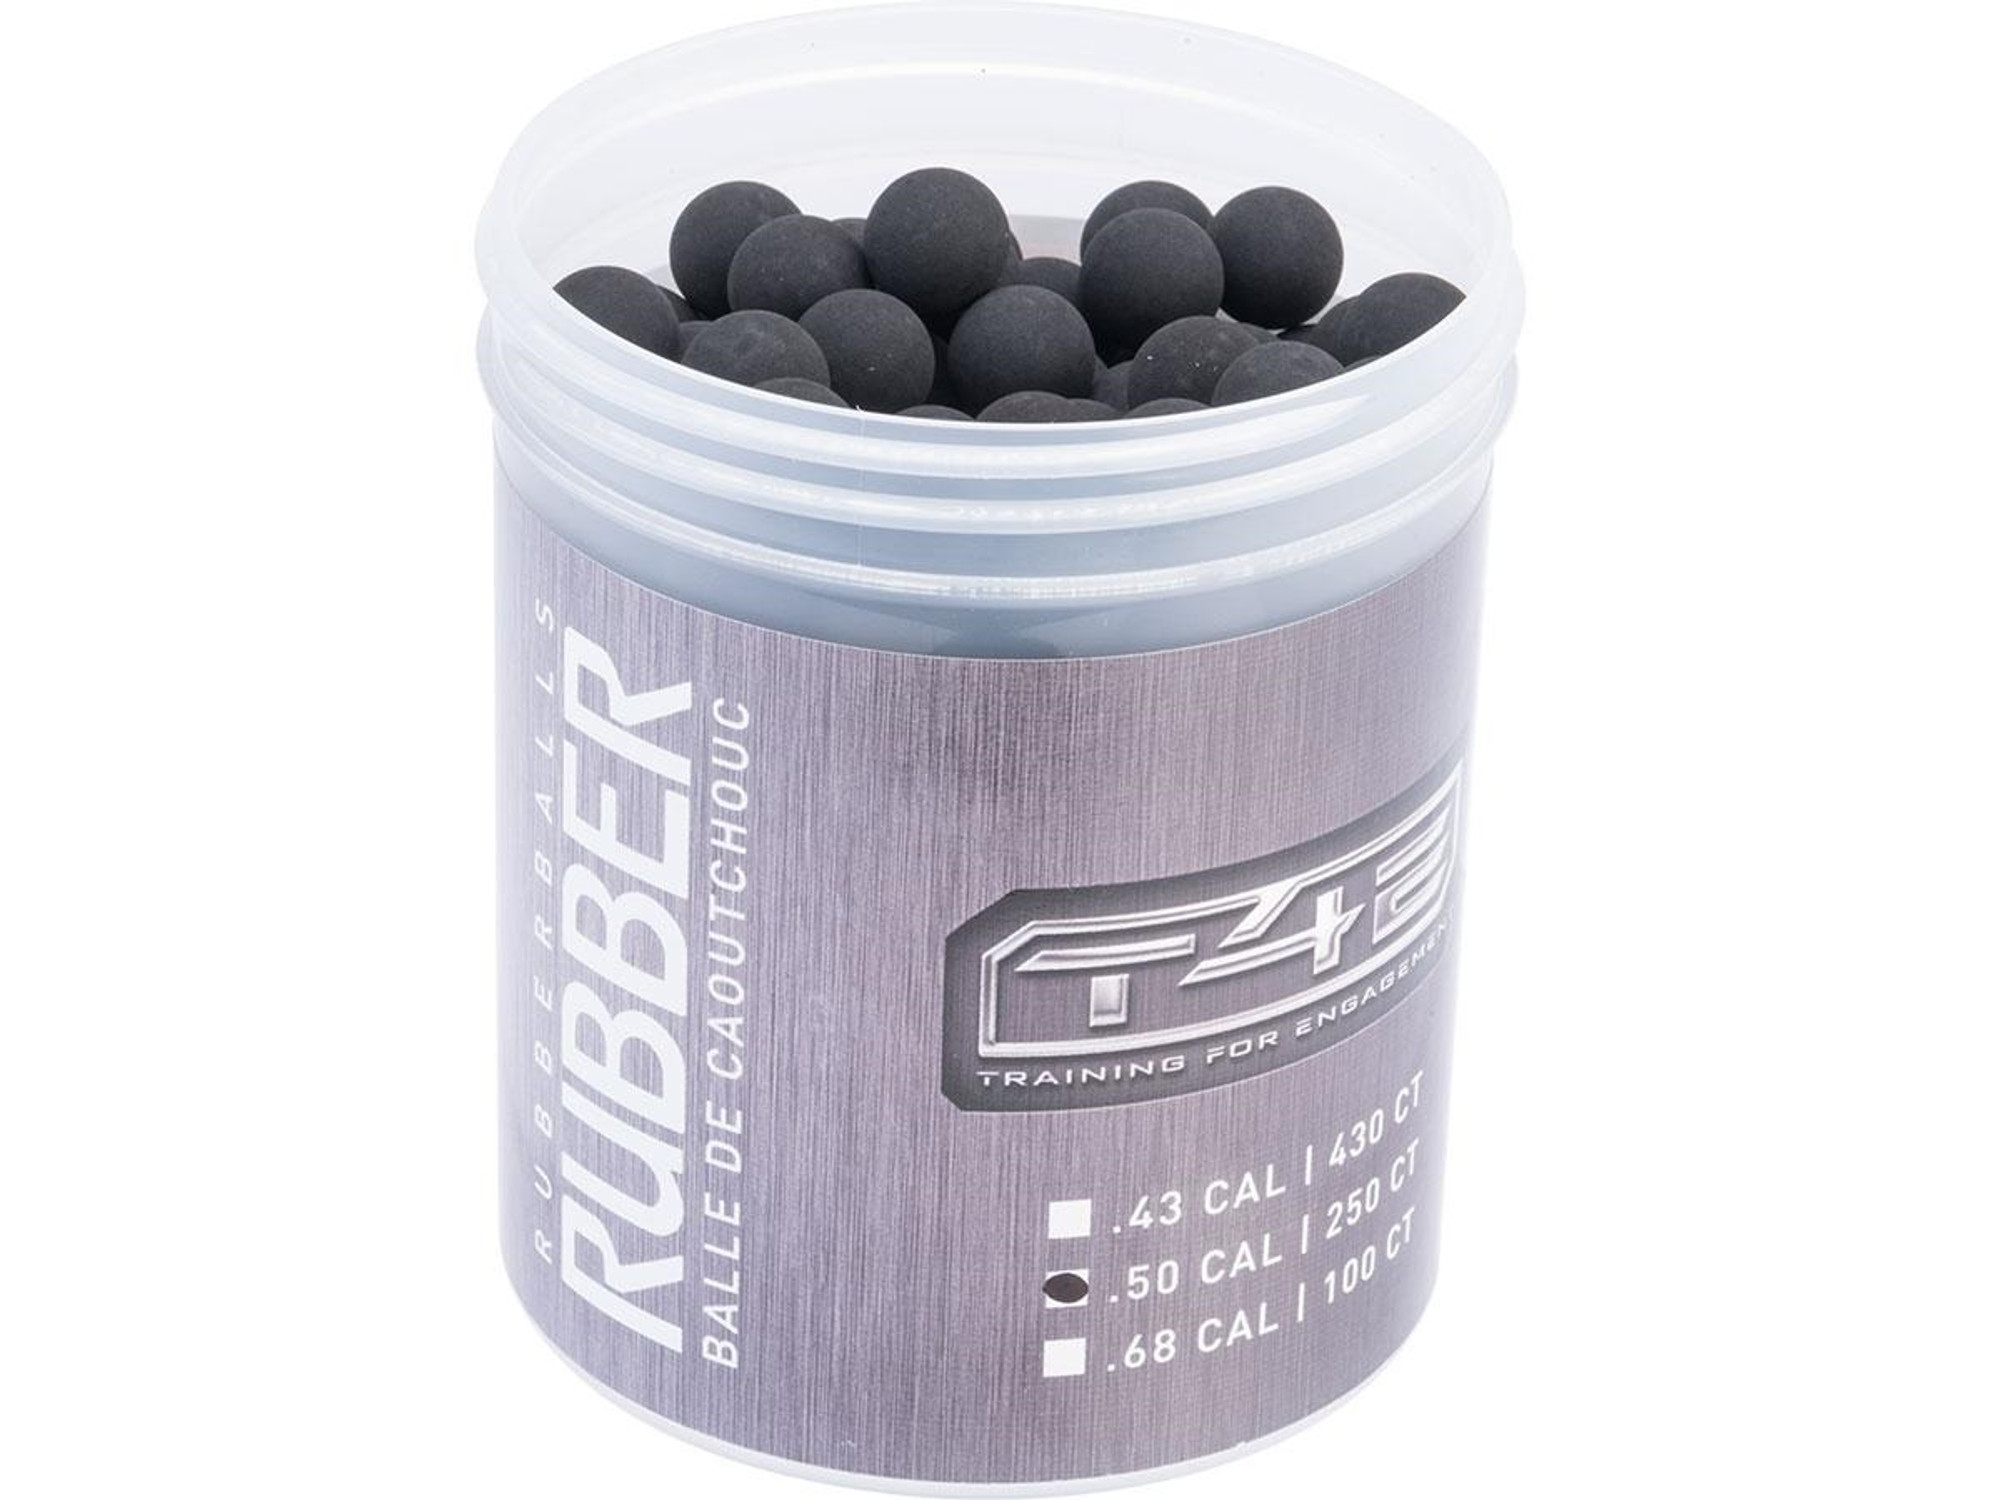 T4E Training for Engagement Rubber Ball Training Munitions (Caliber: .50 / 250 Rounds)